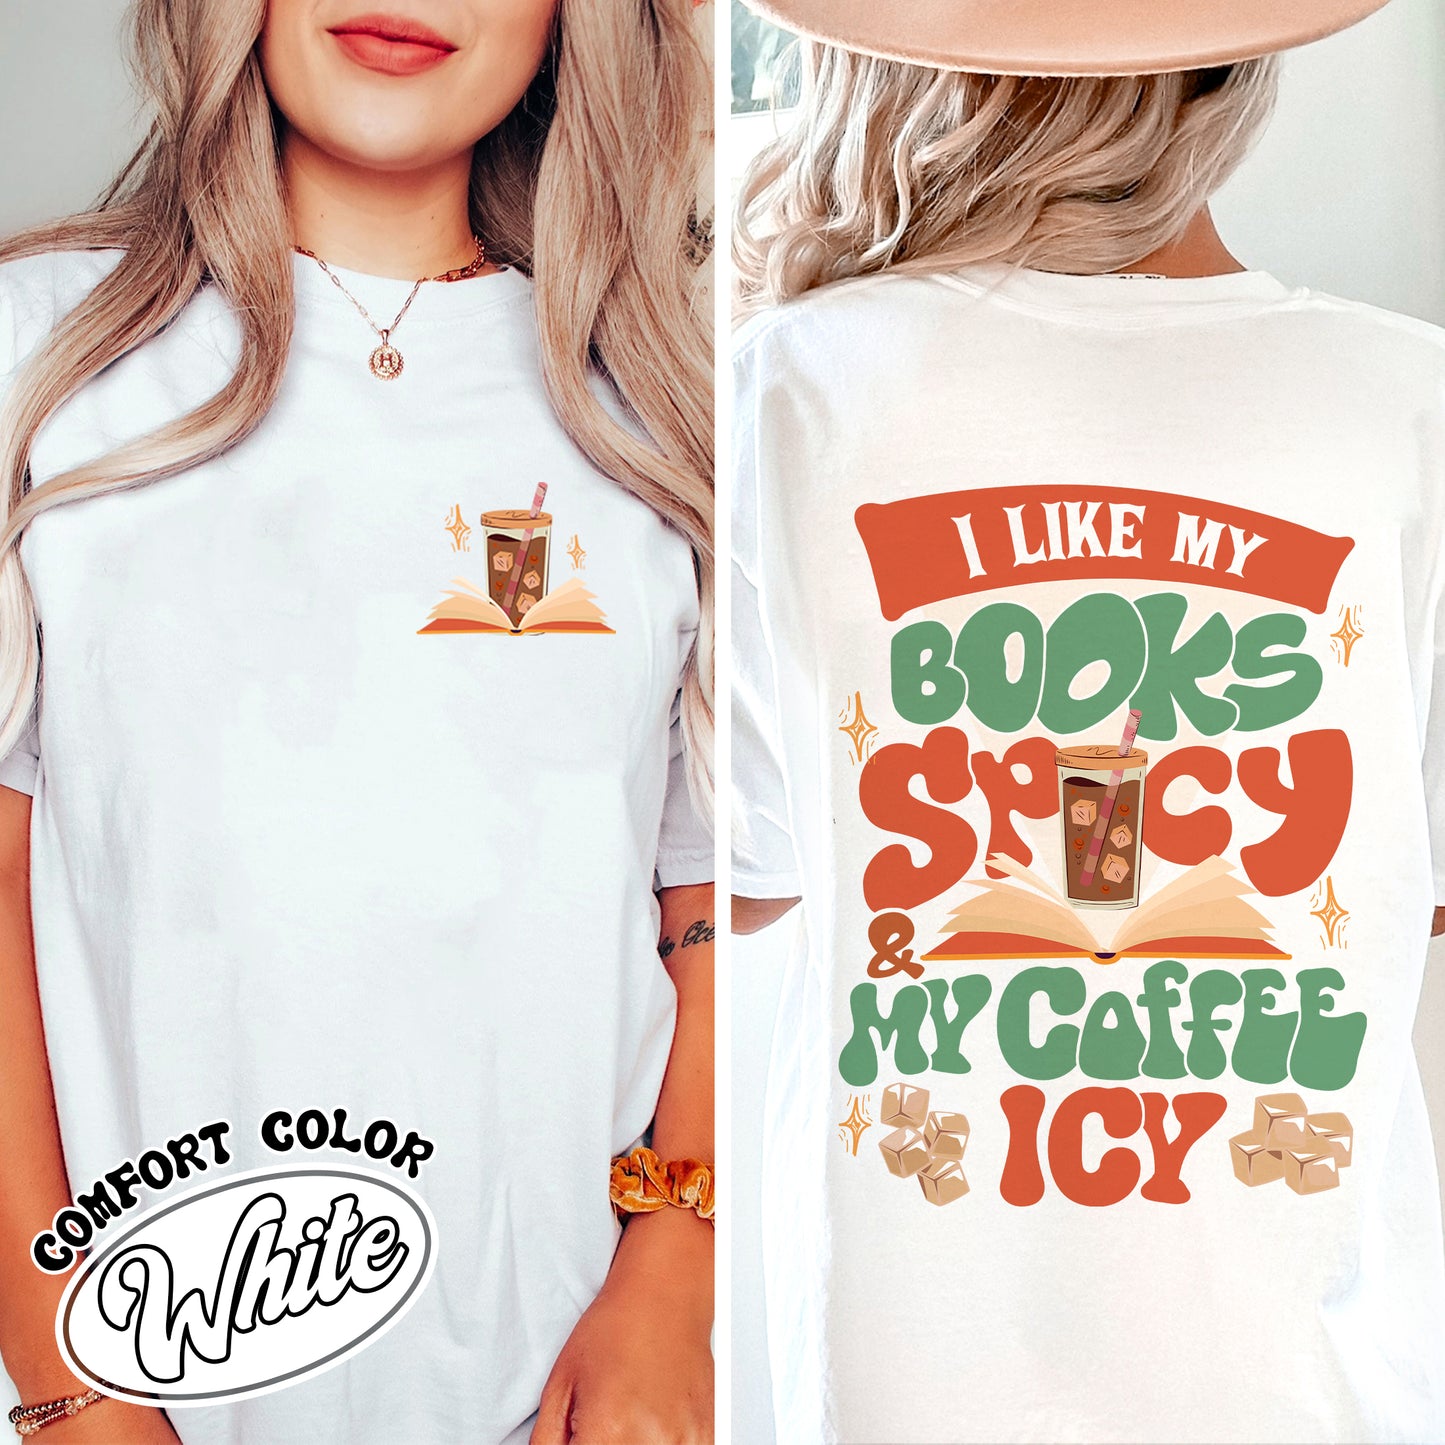 I Like My Books Spicy And My Coffee Icy Comfort Color Shirt, I Like My Books Spicy And My Coffee Icy Shirt, I Like My Book Spicy Shirt, Sweat Shirts For Book Lovers